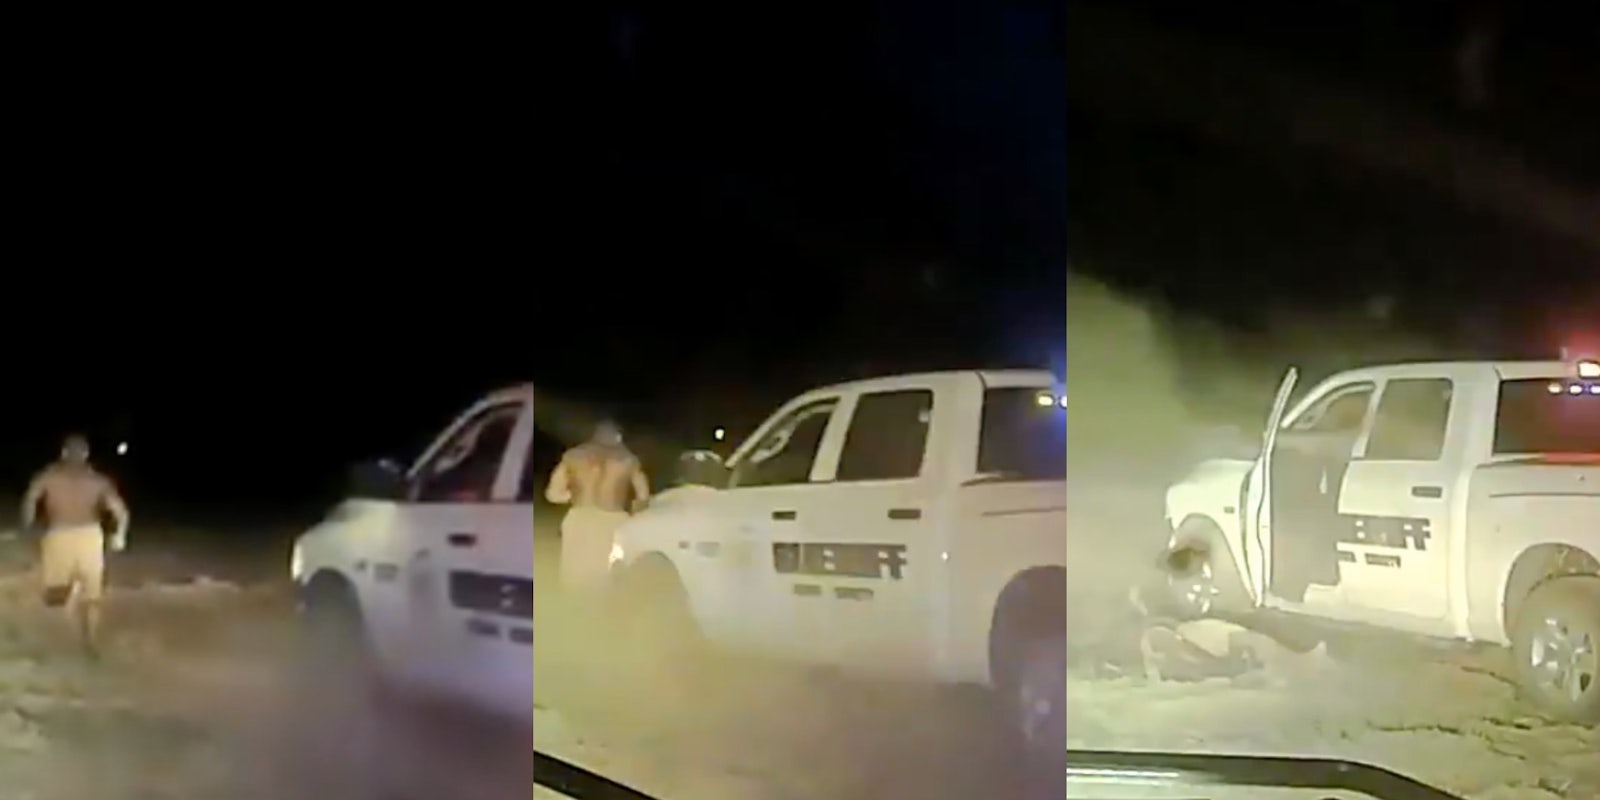 Cop runs over Black man with truck in video